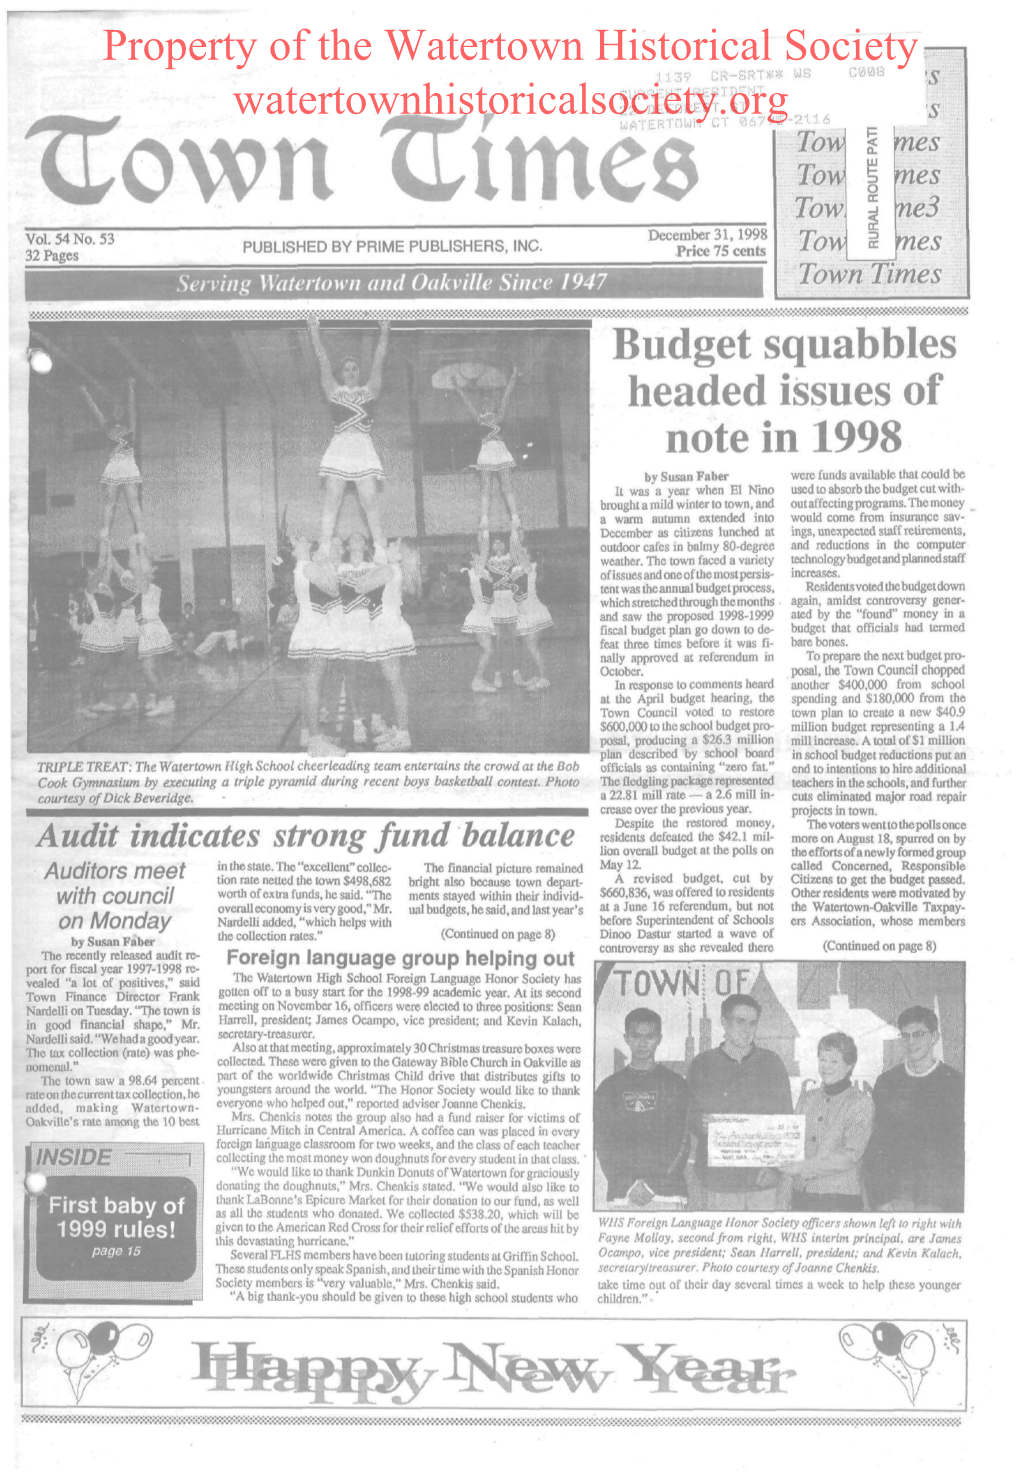 Budget Squabbles Headed Issues of Note in 1998